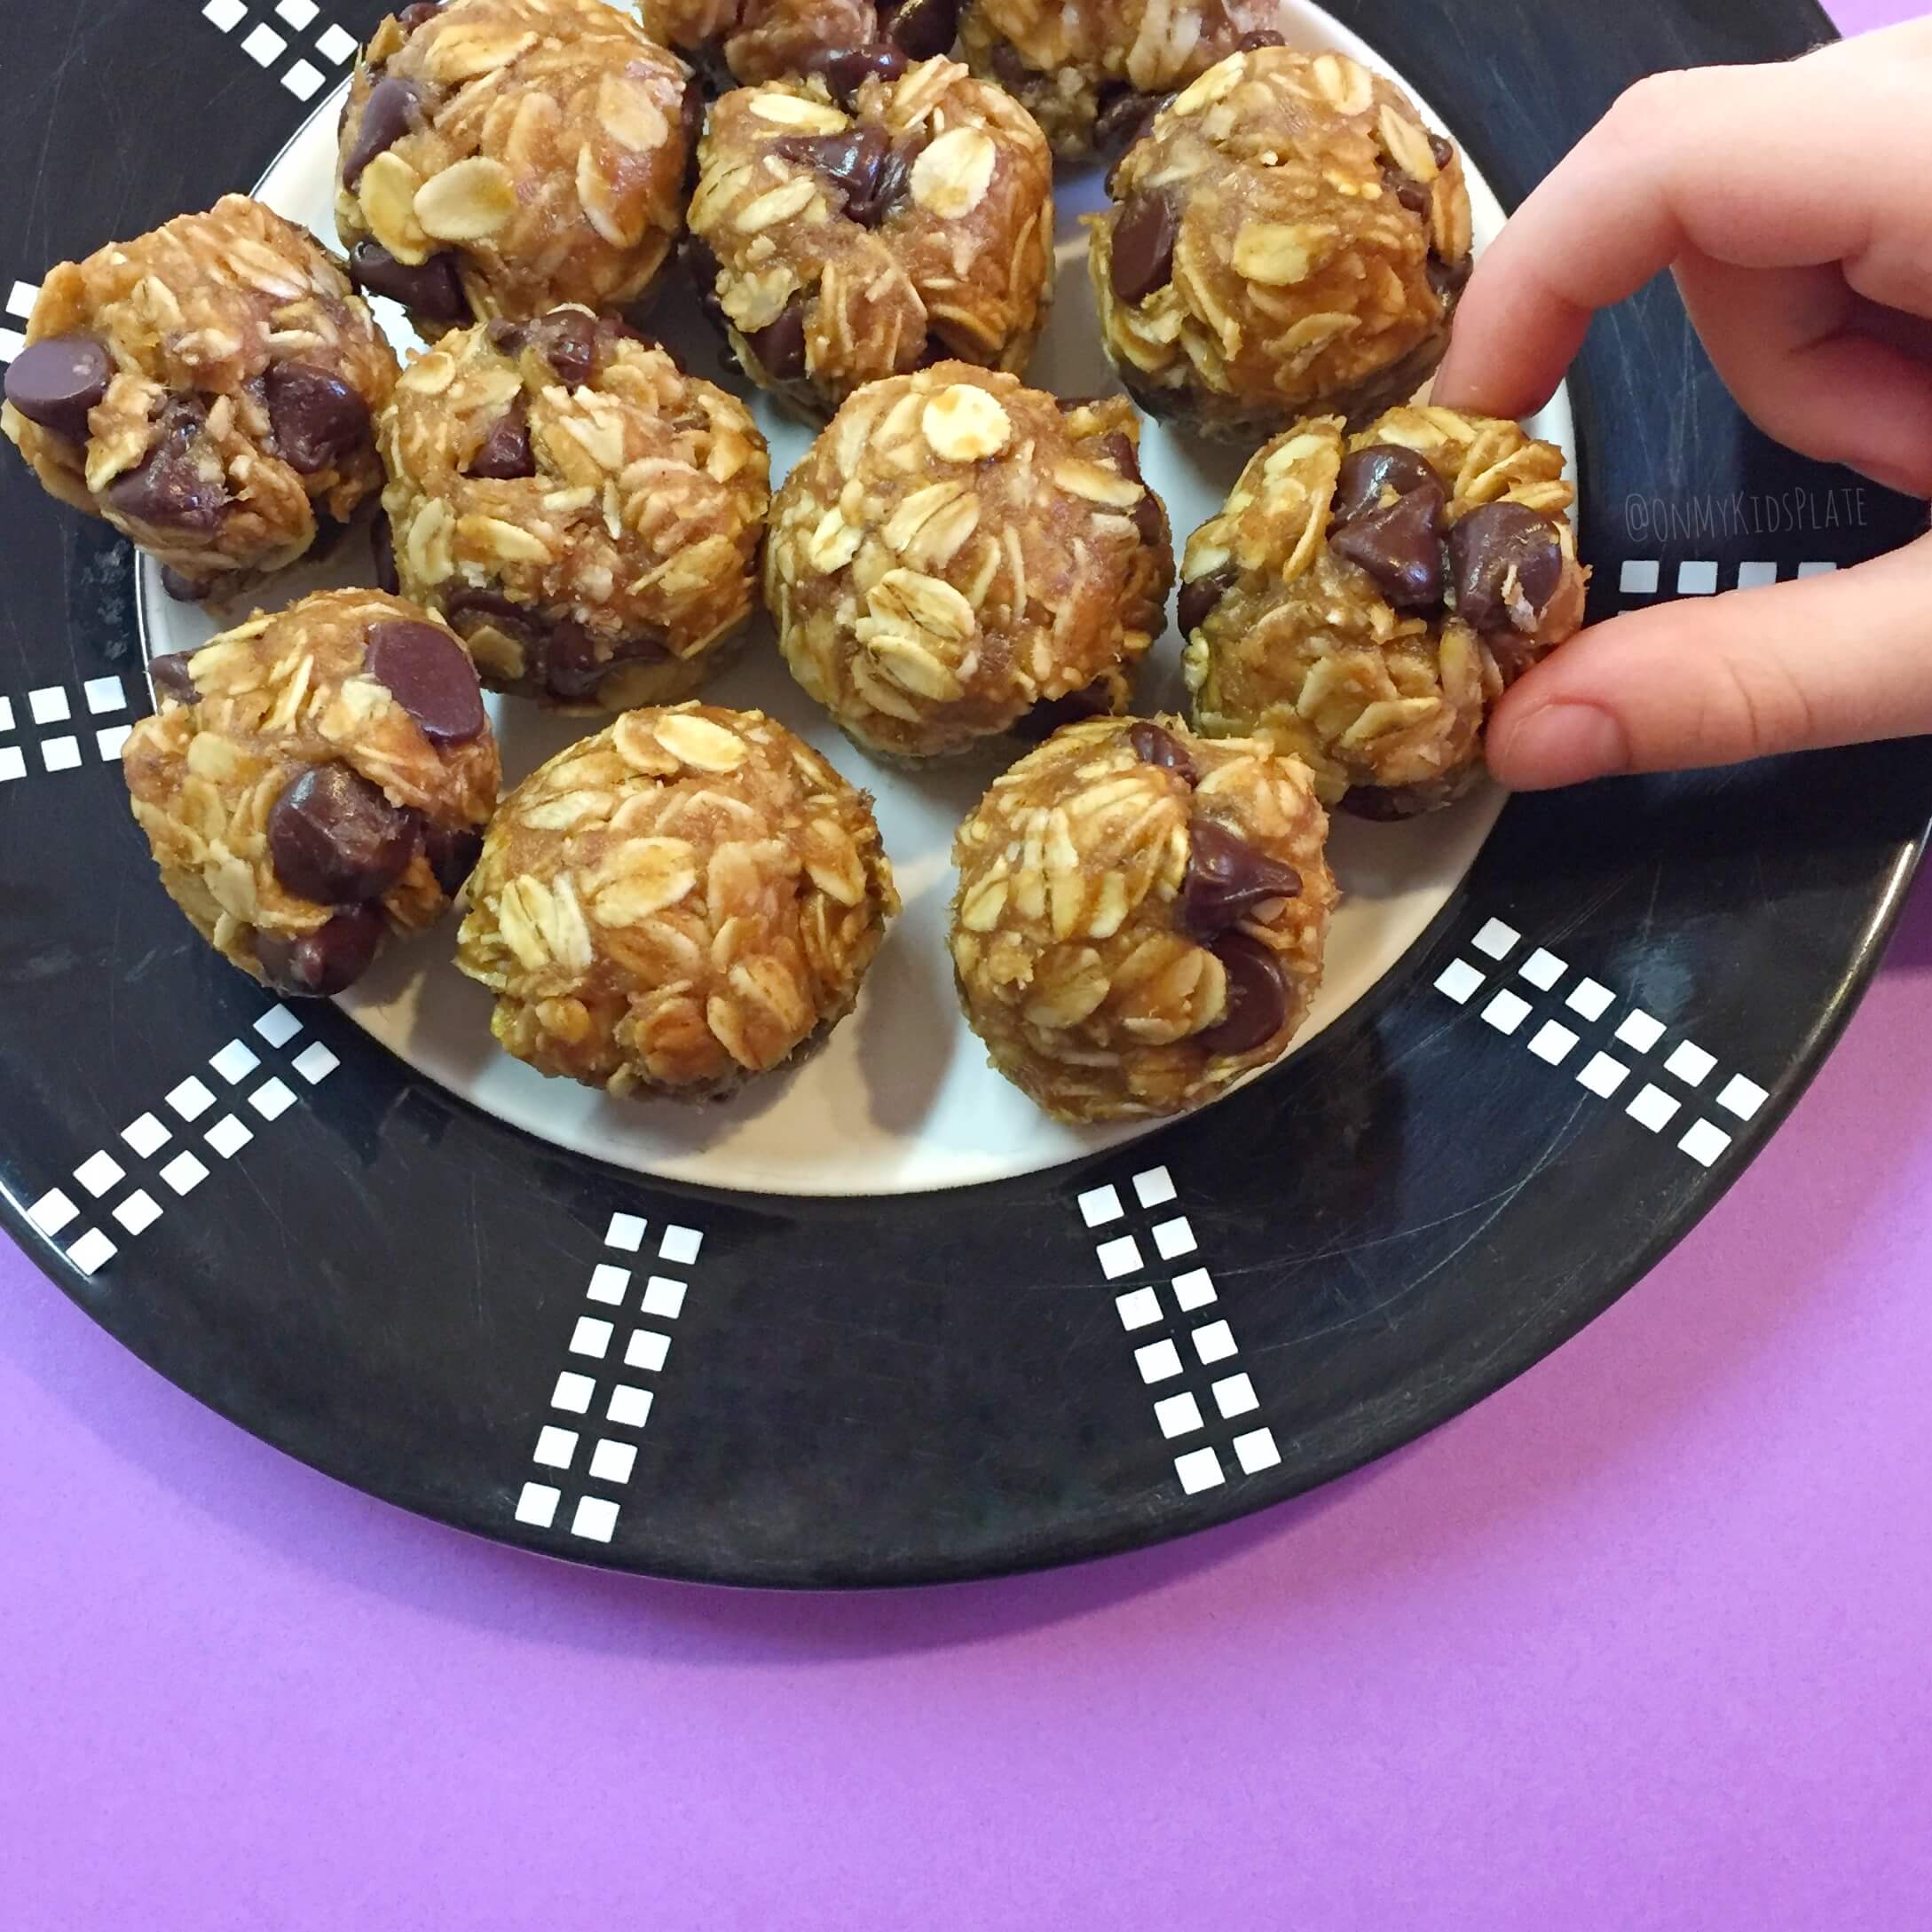 These no bake chocolate chip energy bites are a sweet treat snack for the kids, but are simple, quick and pack a protein punch too!